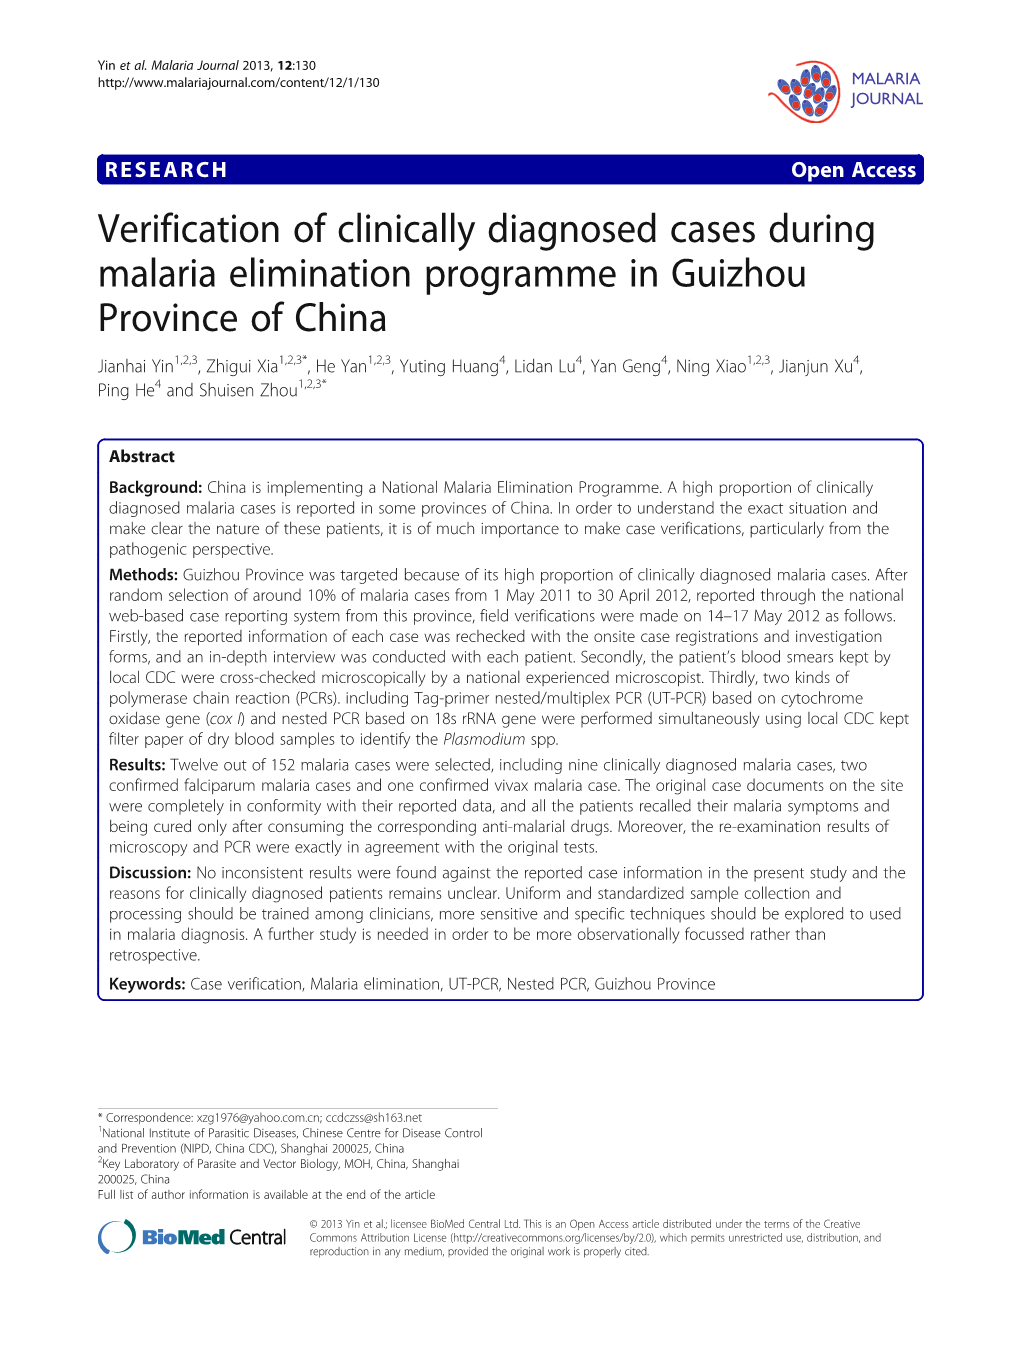 Verification of Clinically Diagnosed Cases During